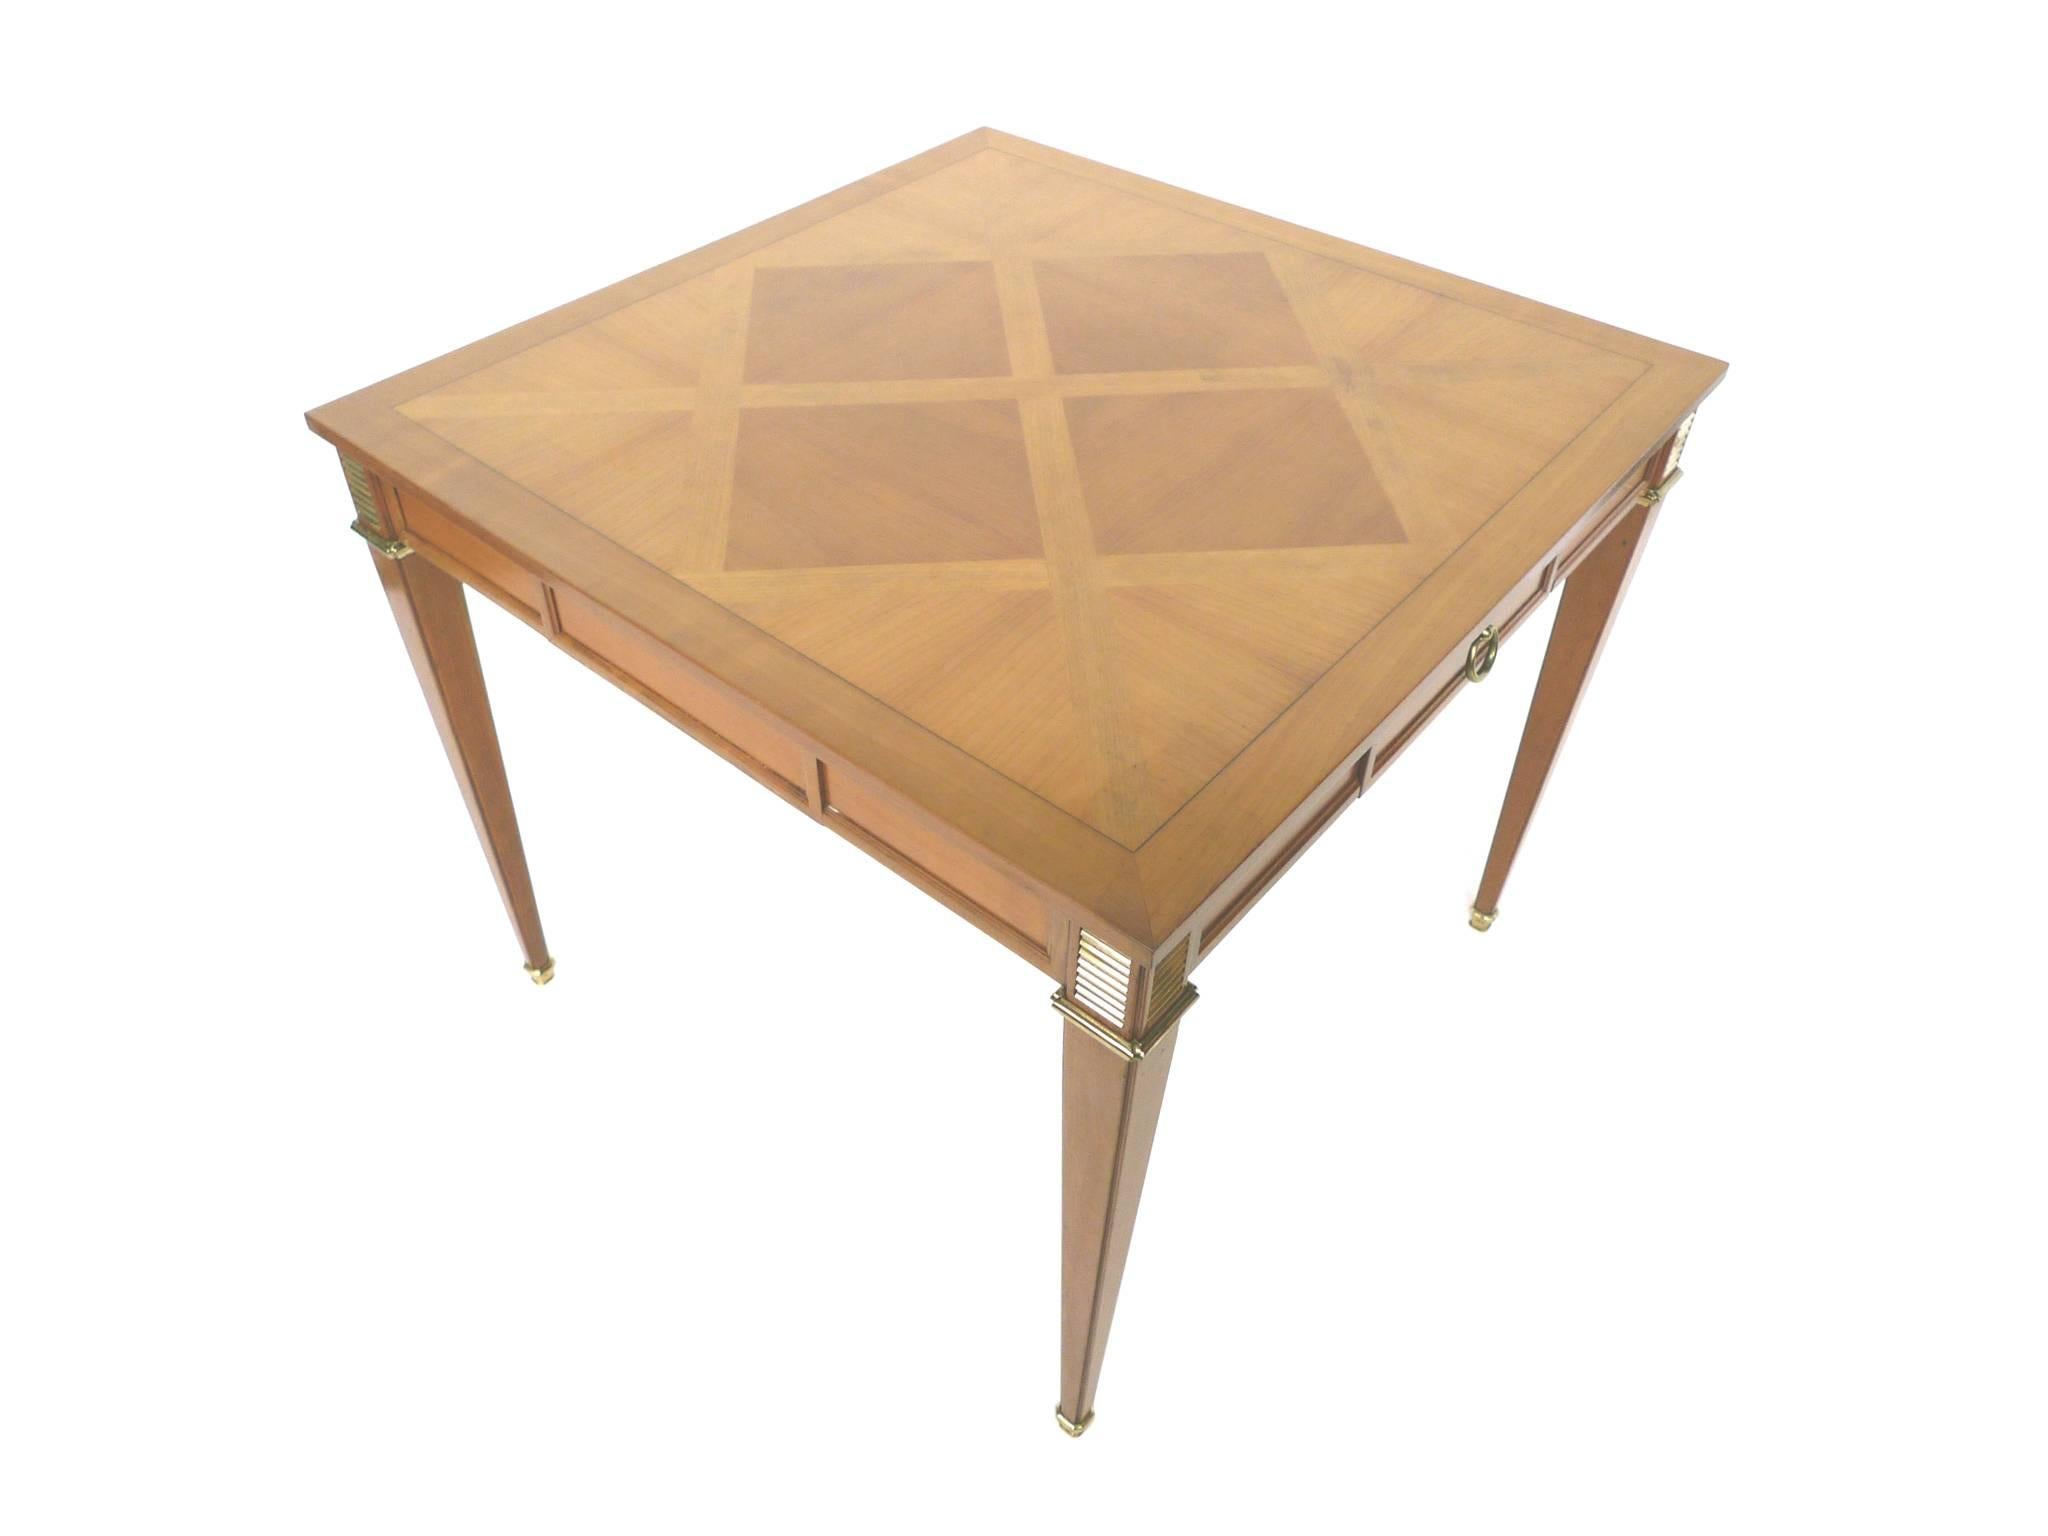 This Mid-20th century game table consists of mahogany wood with brass accents. It was manufactured by the Baker Furniture Company. Among its remarkable features are the parquetry pattern of the table-top, which is newly lacquered, the tapering legs,